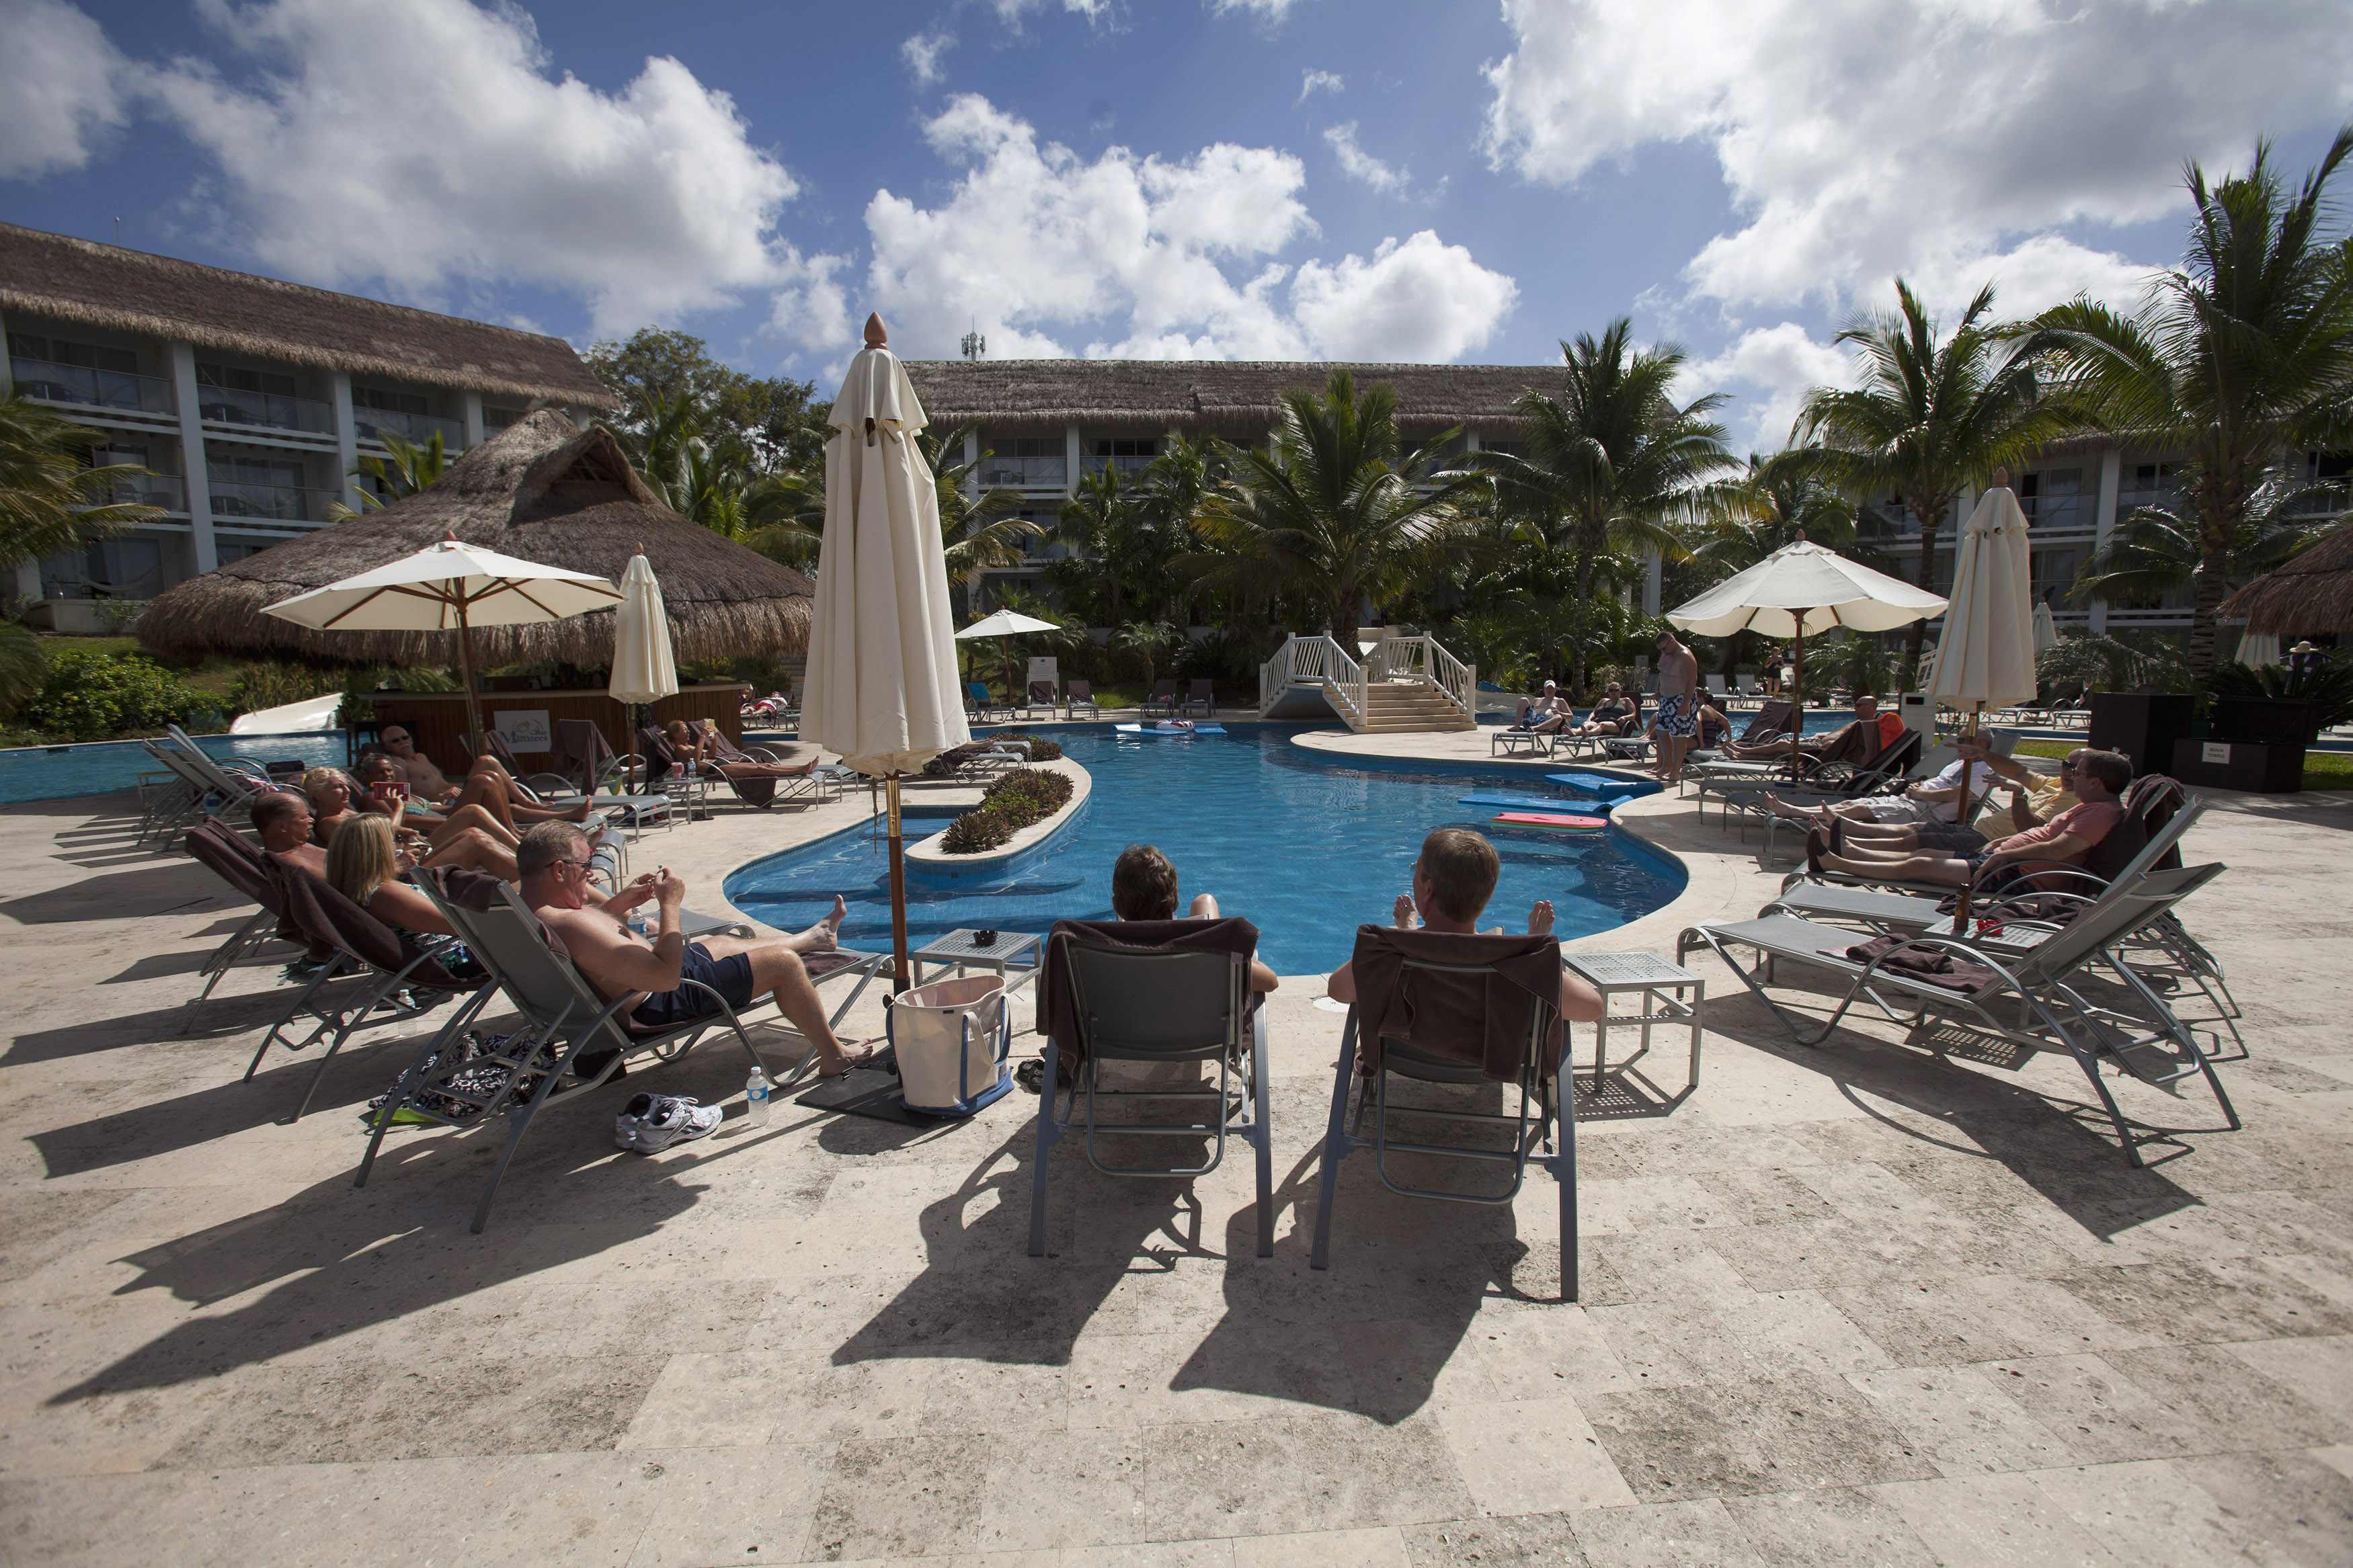 Tourists sunbathe around a pool at a hotel in Cozumel